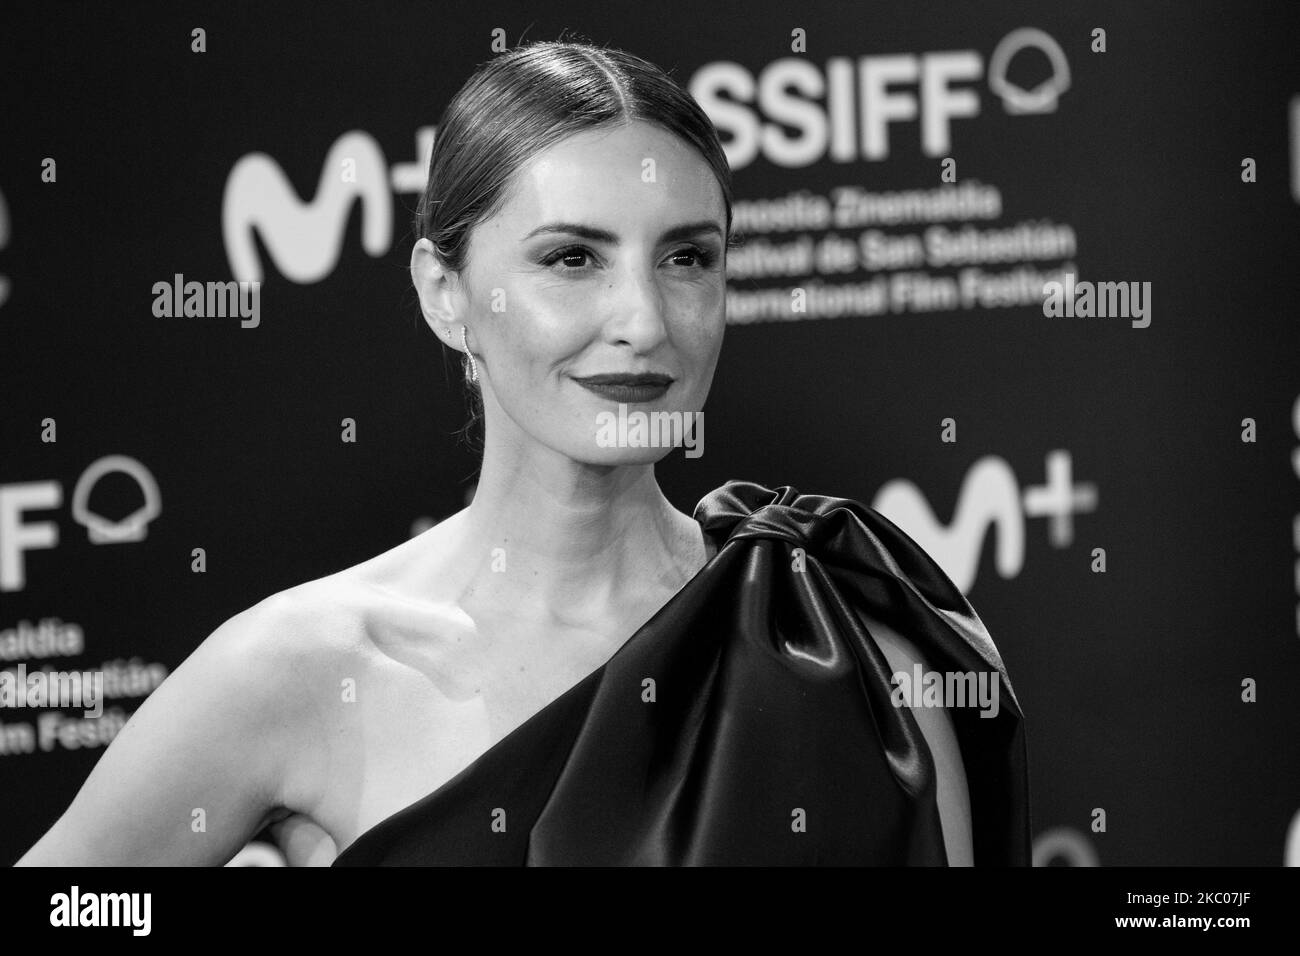 (EDITOR'S NOTE: Image was converted to black and white) Monica de Tomas attends the 'Rifkin's Festival' Premiere during the 68th San Sebastian International Film Festival at the Kursaal Palace on September 18, 2020 in San Sebastian, Spain. (Photo by Frank Lovicario/NurPhoto) Stock Photo